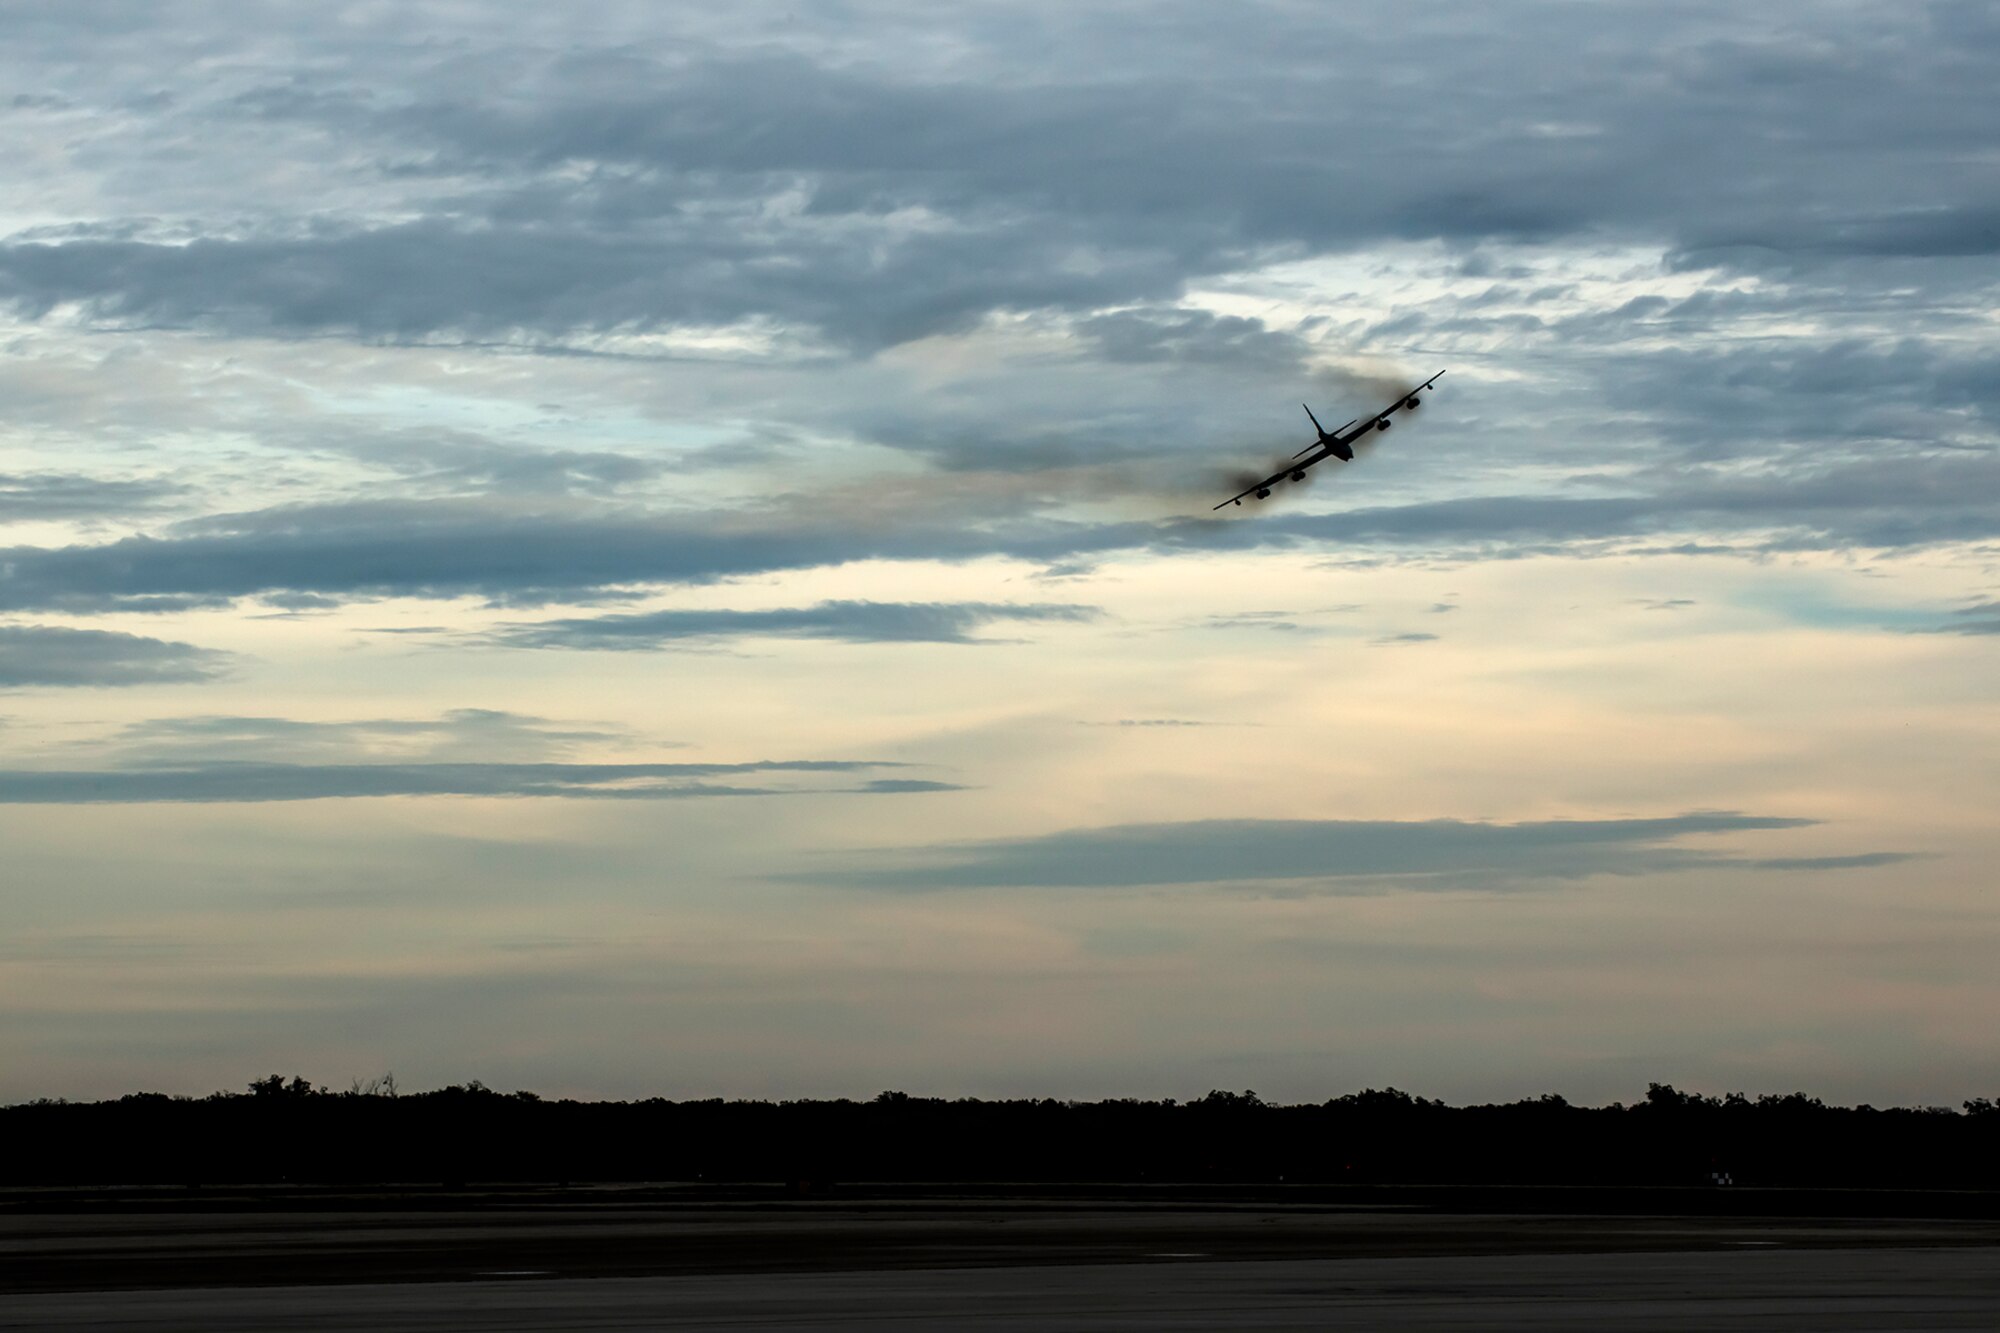 A B-52H Stratofortress assigned to the 93rd Bomb Squadron (BS), 307th Bomb Wing, turns before making a final approach for landing at Barksdale Air Force Base, La., Nov. 8, 2013. In 2010, the 93rd BS made history by sending a B-52 to participate in the NATO Days in Ostrava air show, which marked the first landing of a B-52 in the Czech Republic. (U.S. Force photo by Master Sgt. Greg Steele/Released)